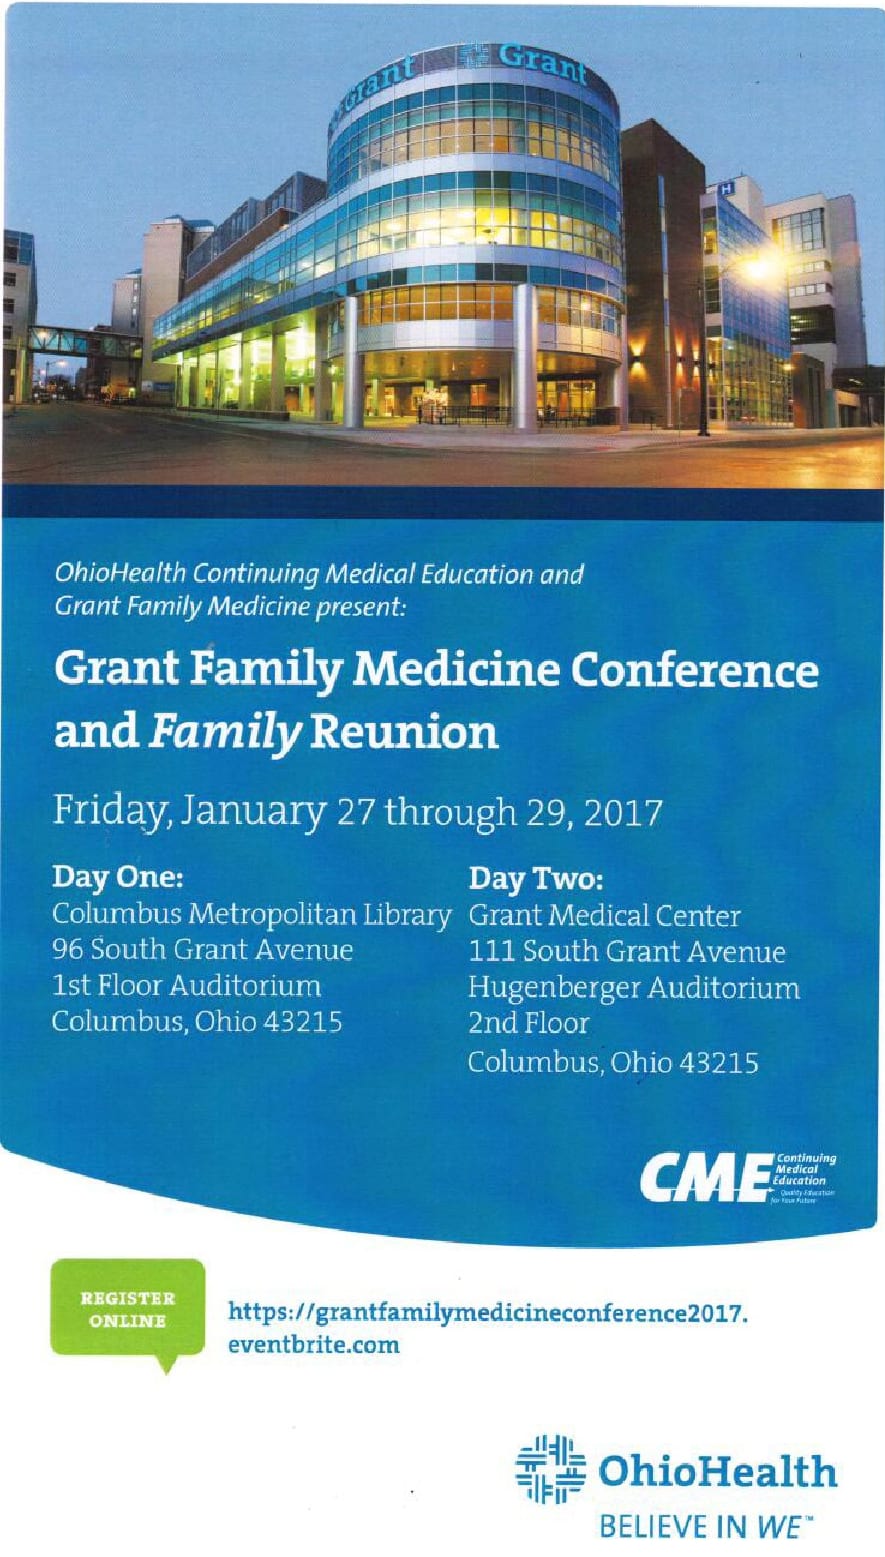 Grant Family Medicine Conference and Family Reunion